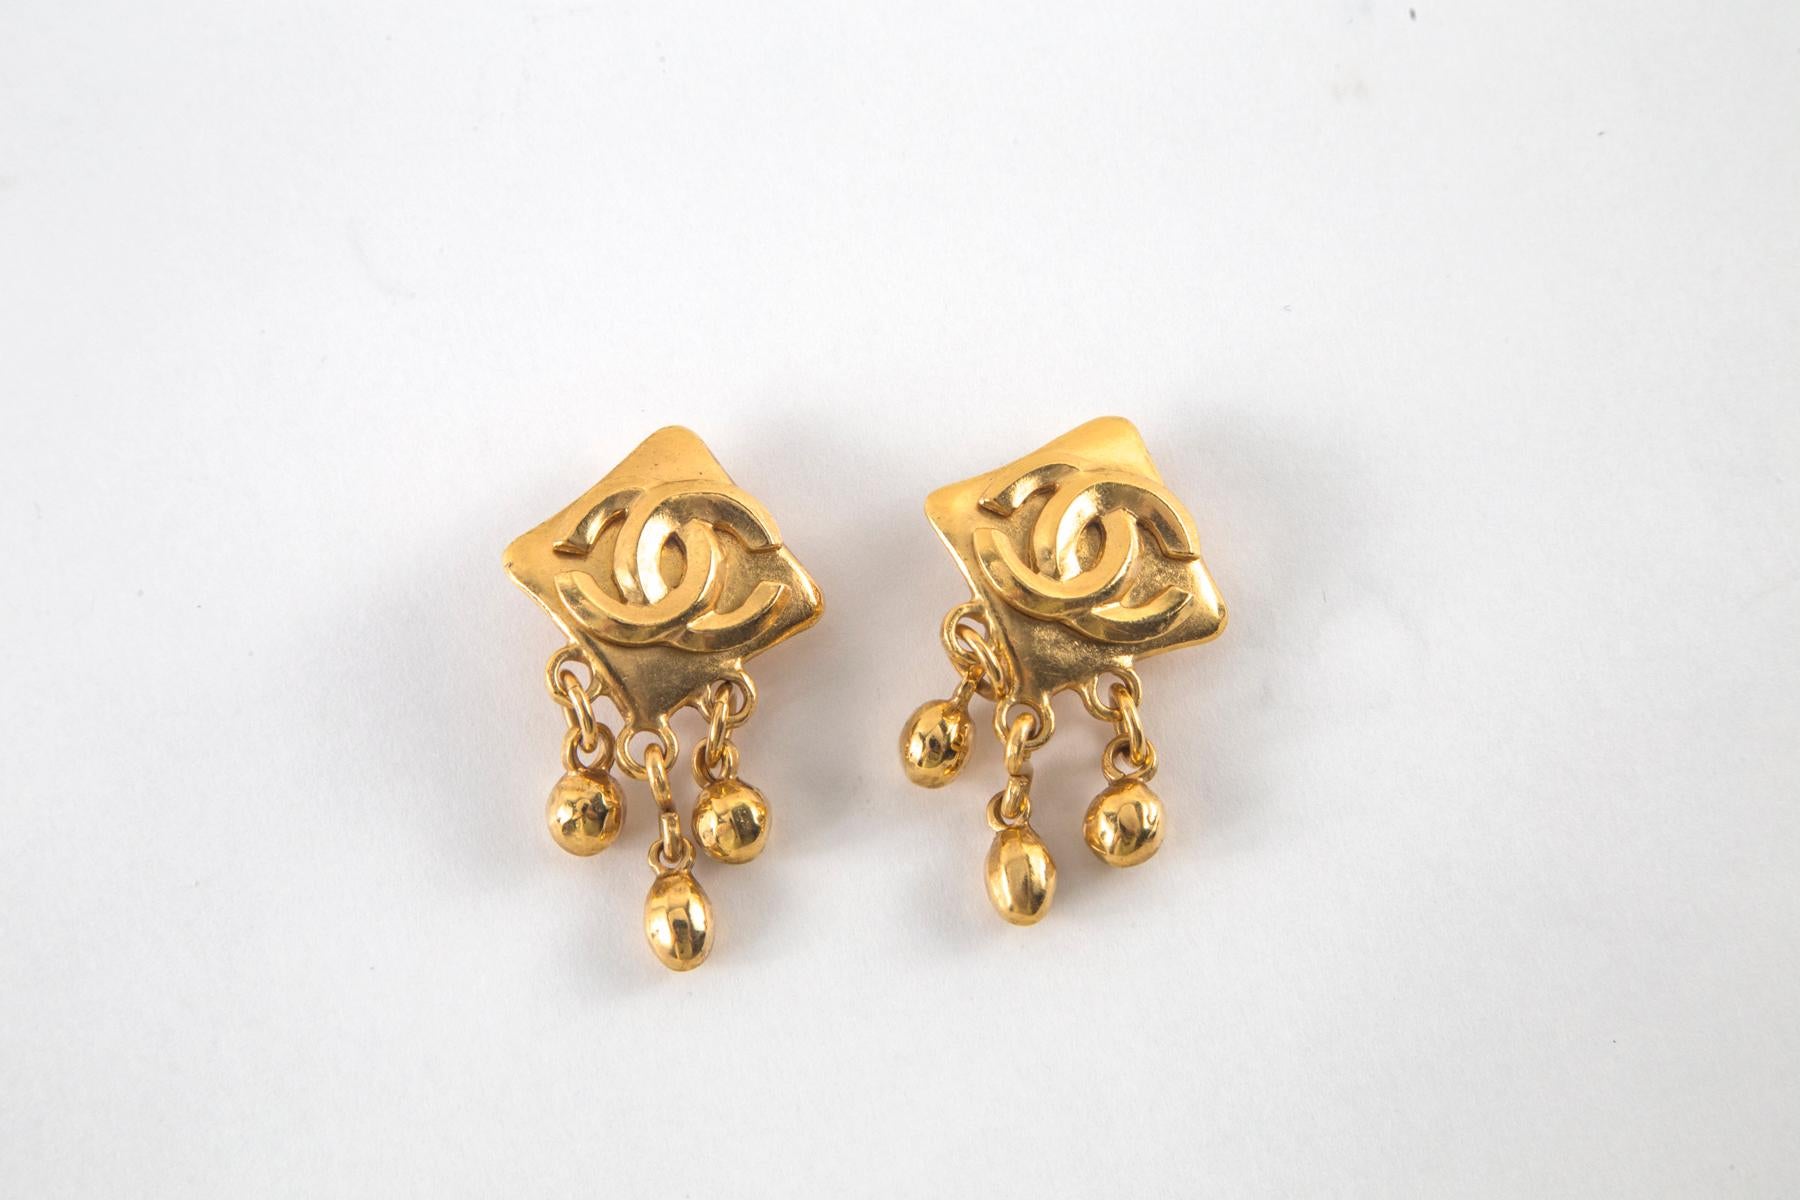 Chanel Gold CC Square Earrings with Drops, Clip-on, Stamped with Chanel, CC, Made in France